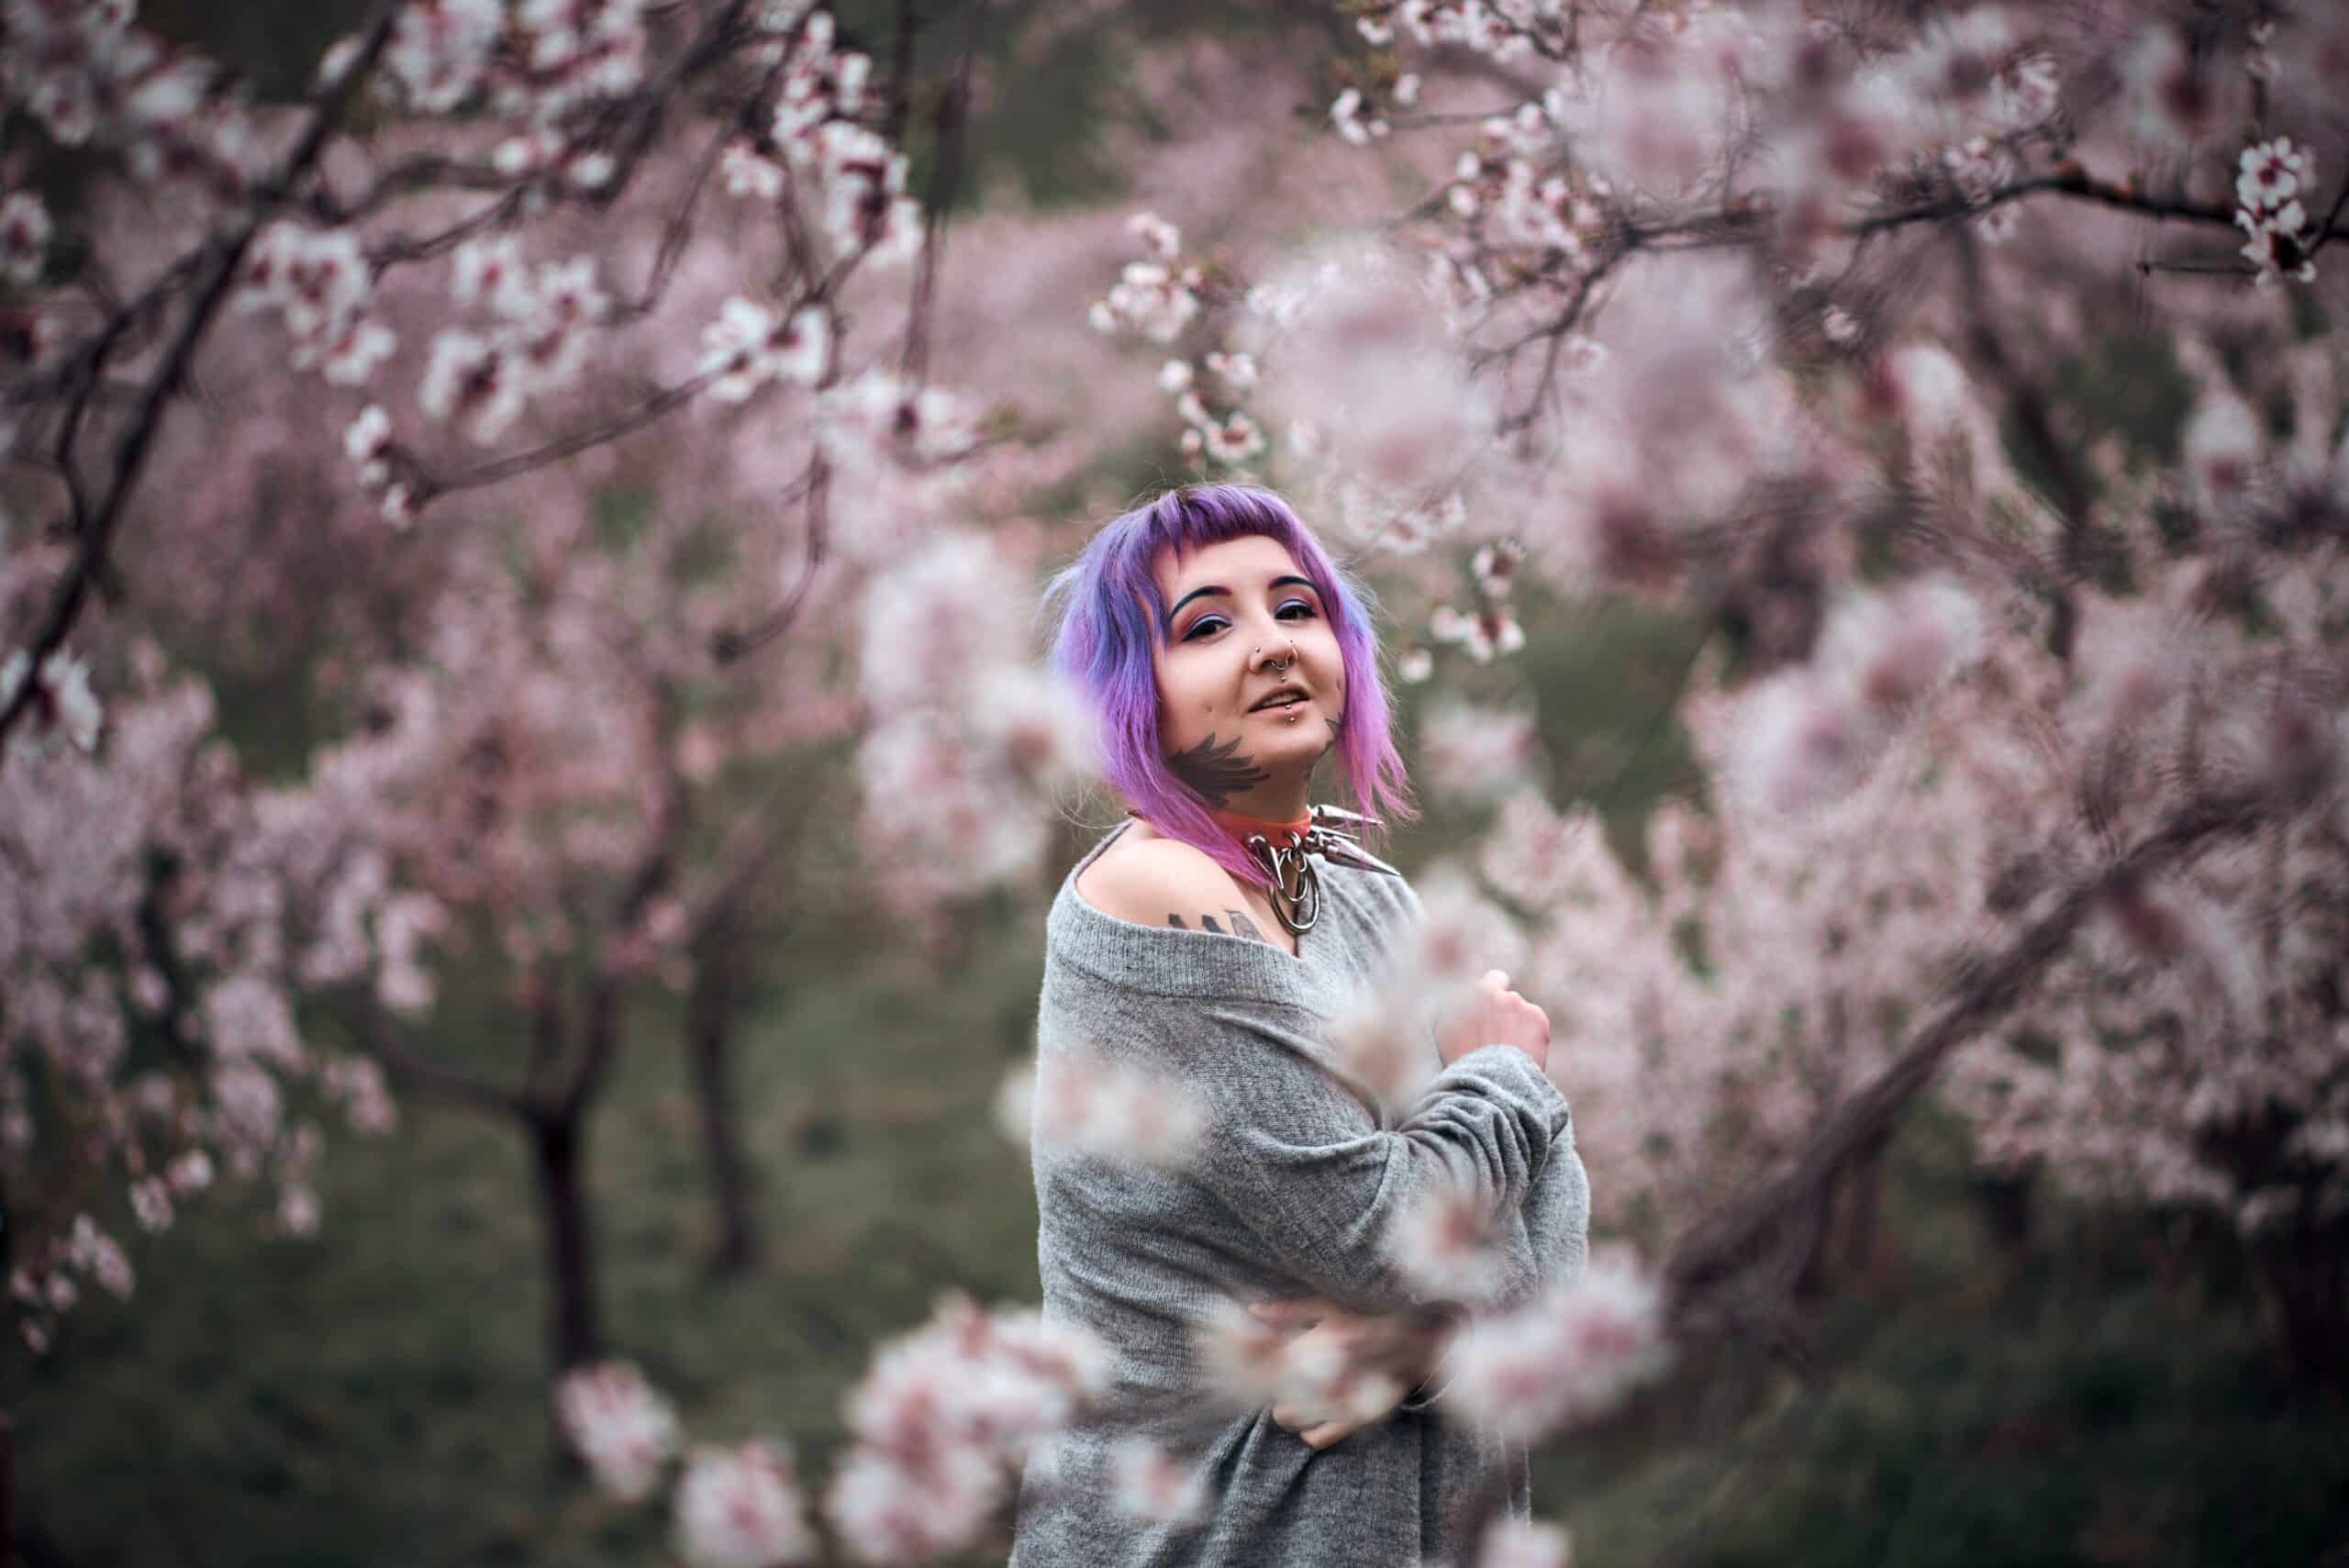 Colorful Flowers, Portraits, and Nature Spring Photography Inspiration